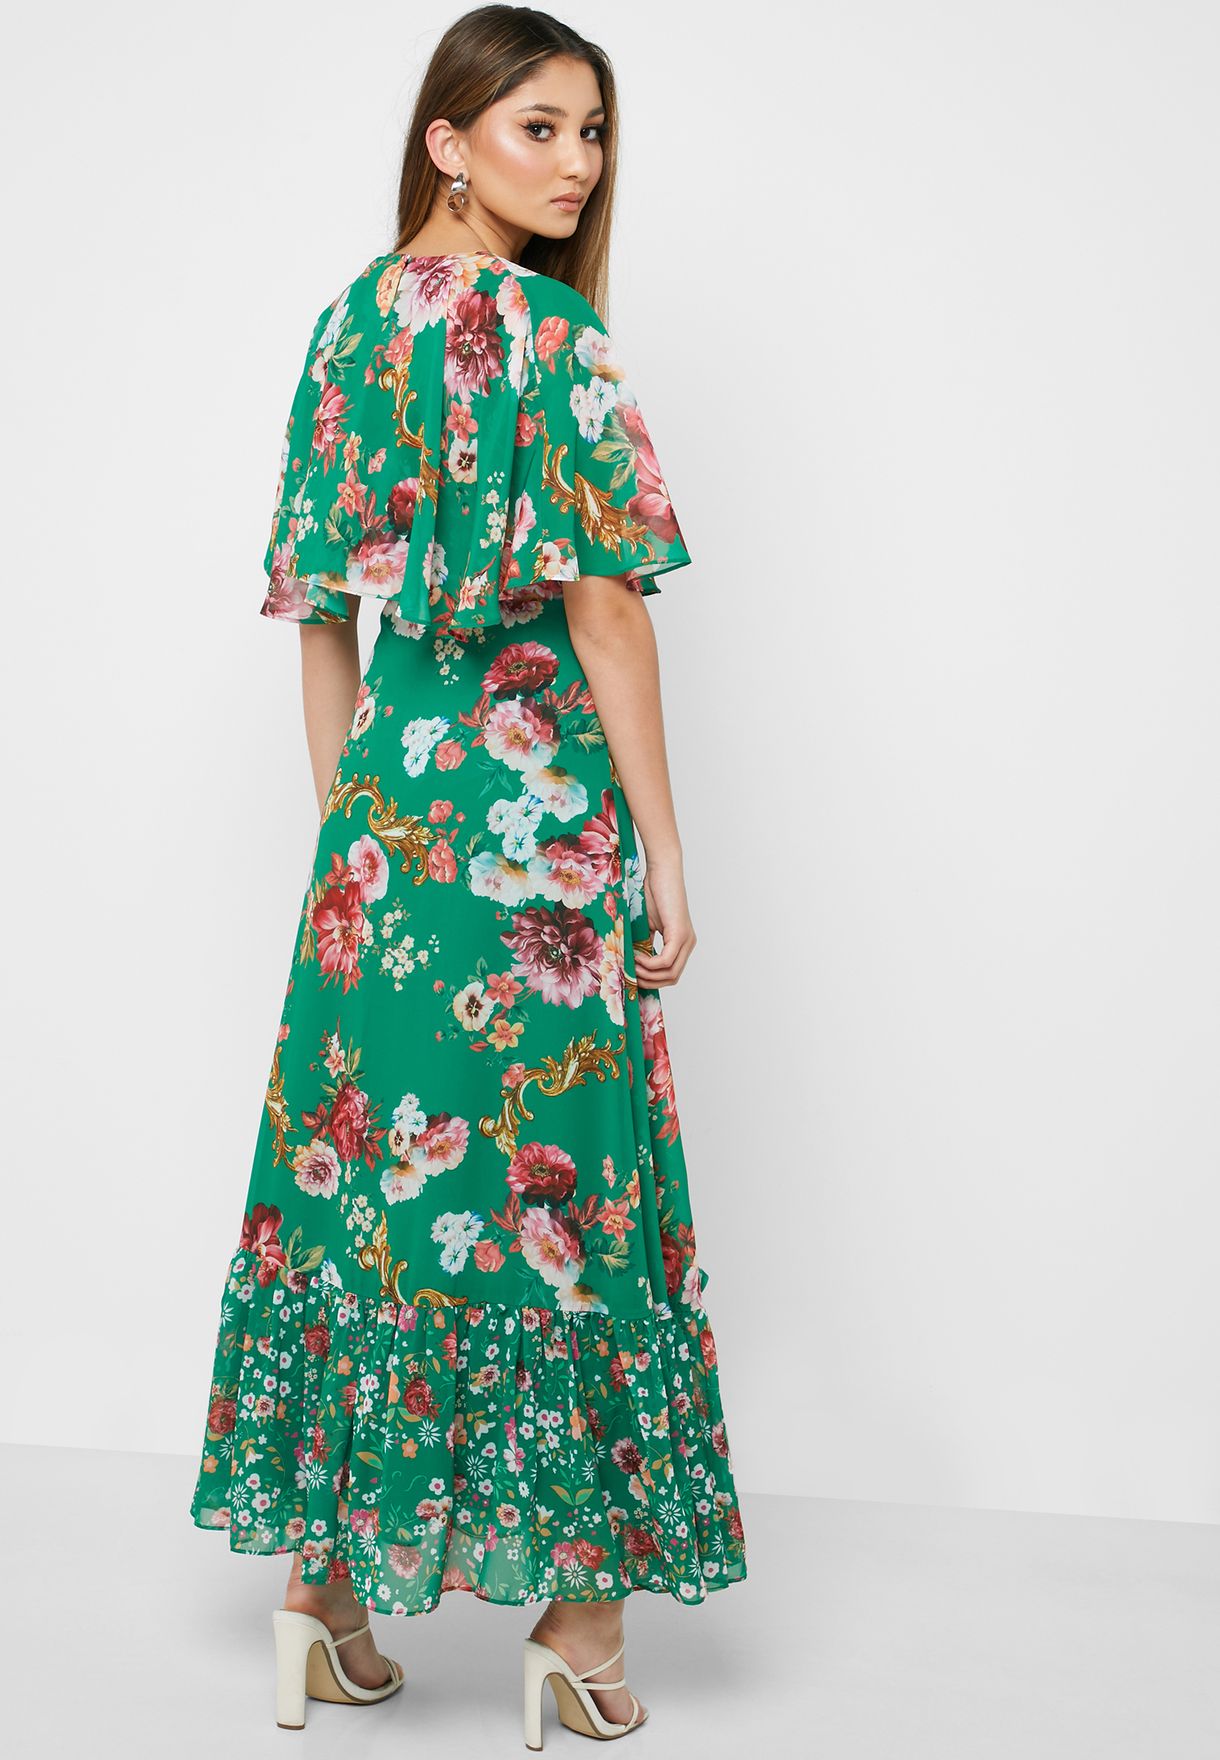 Buy Iconic prints Floral Dress for ...